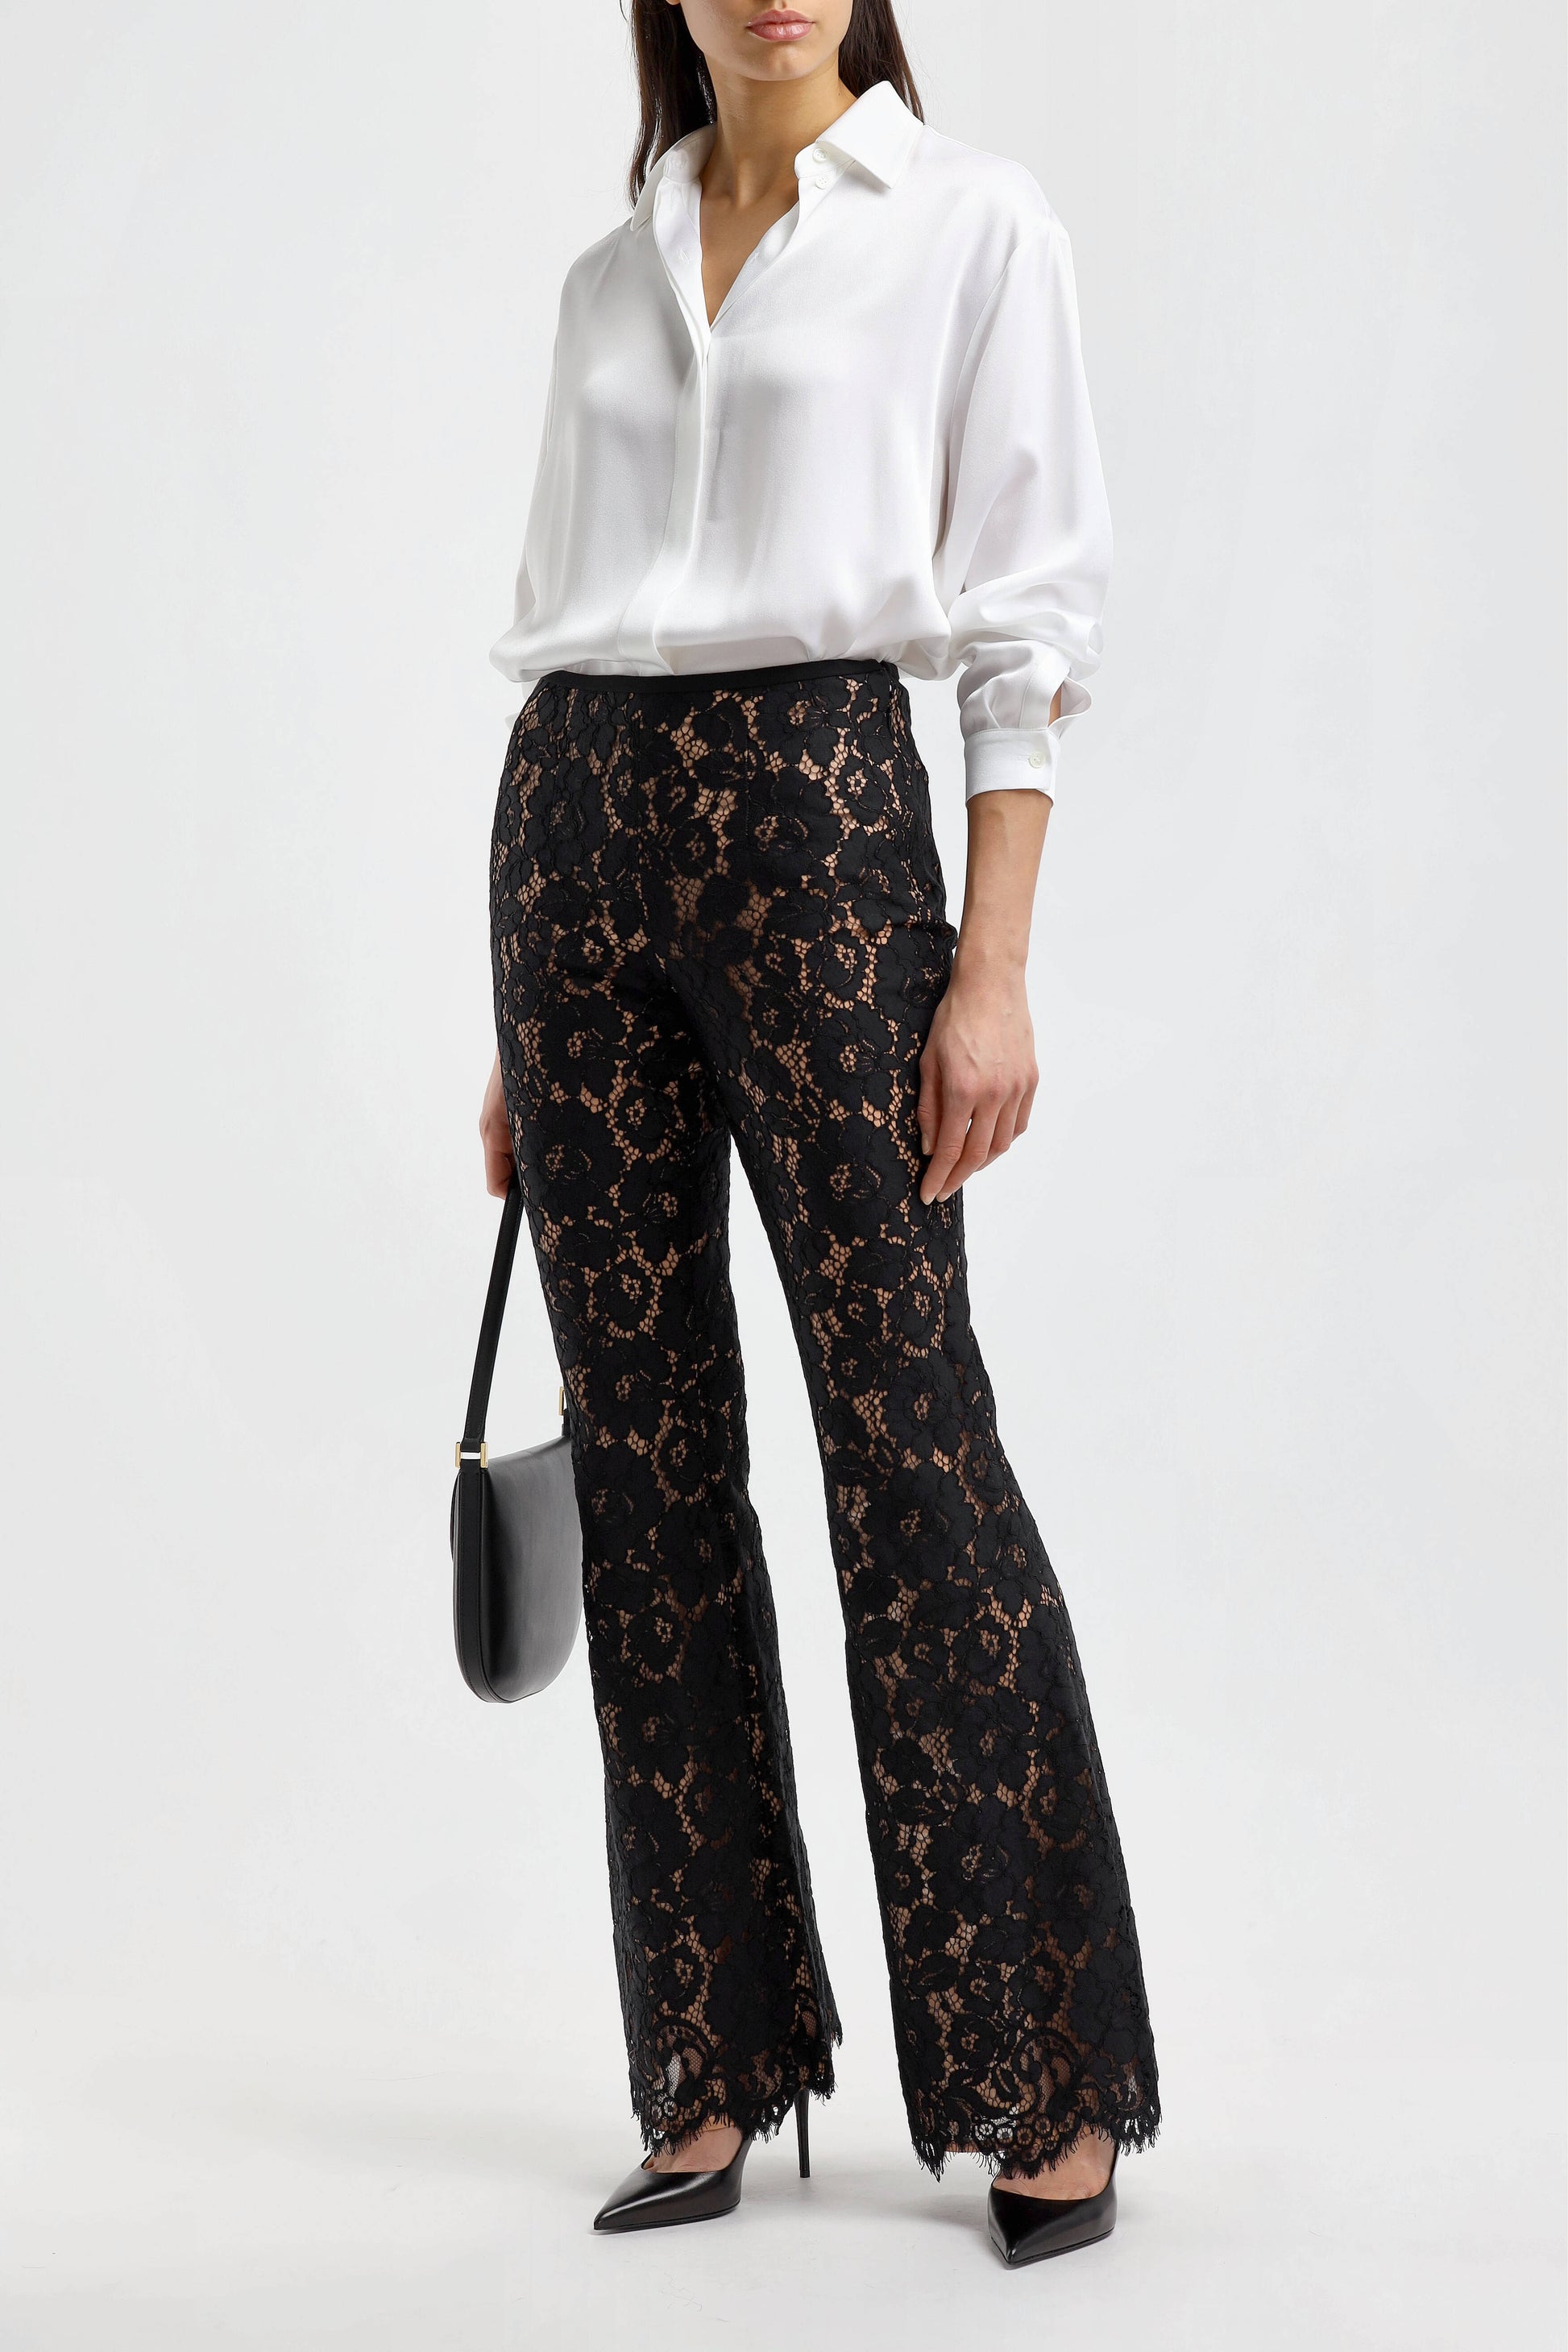 Hose Floral Lace in SchwarzMichael Kors Collection - Anita Hass